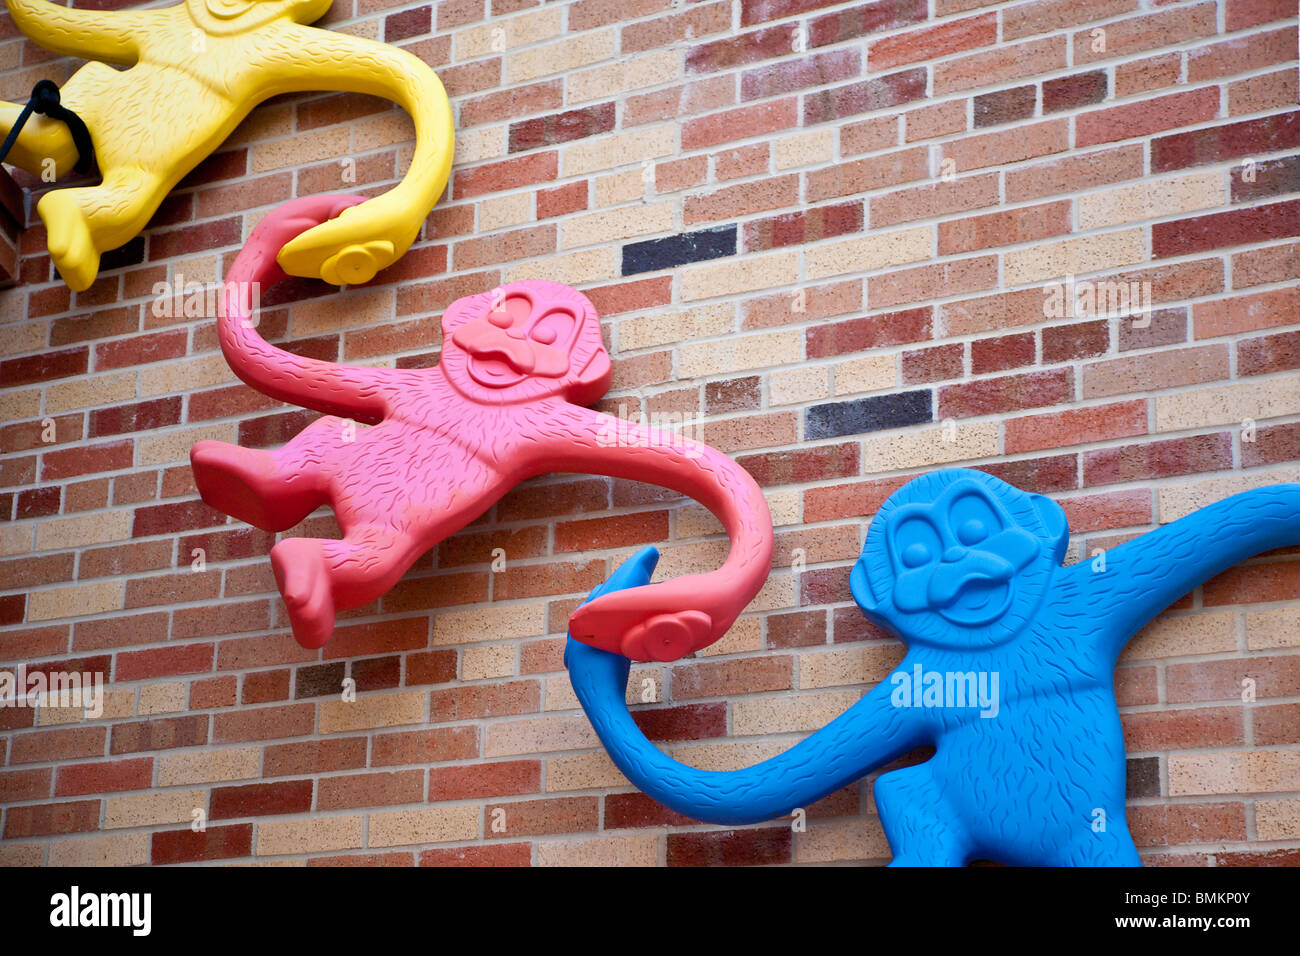 Barrel of Monkeys toys used as decoration on buildings in Pixar Place and Toy Story Mania at Disney's Hollywood Studios Stock Photo